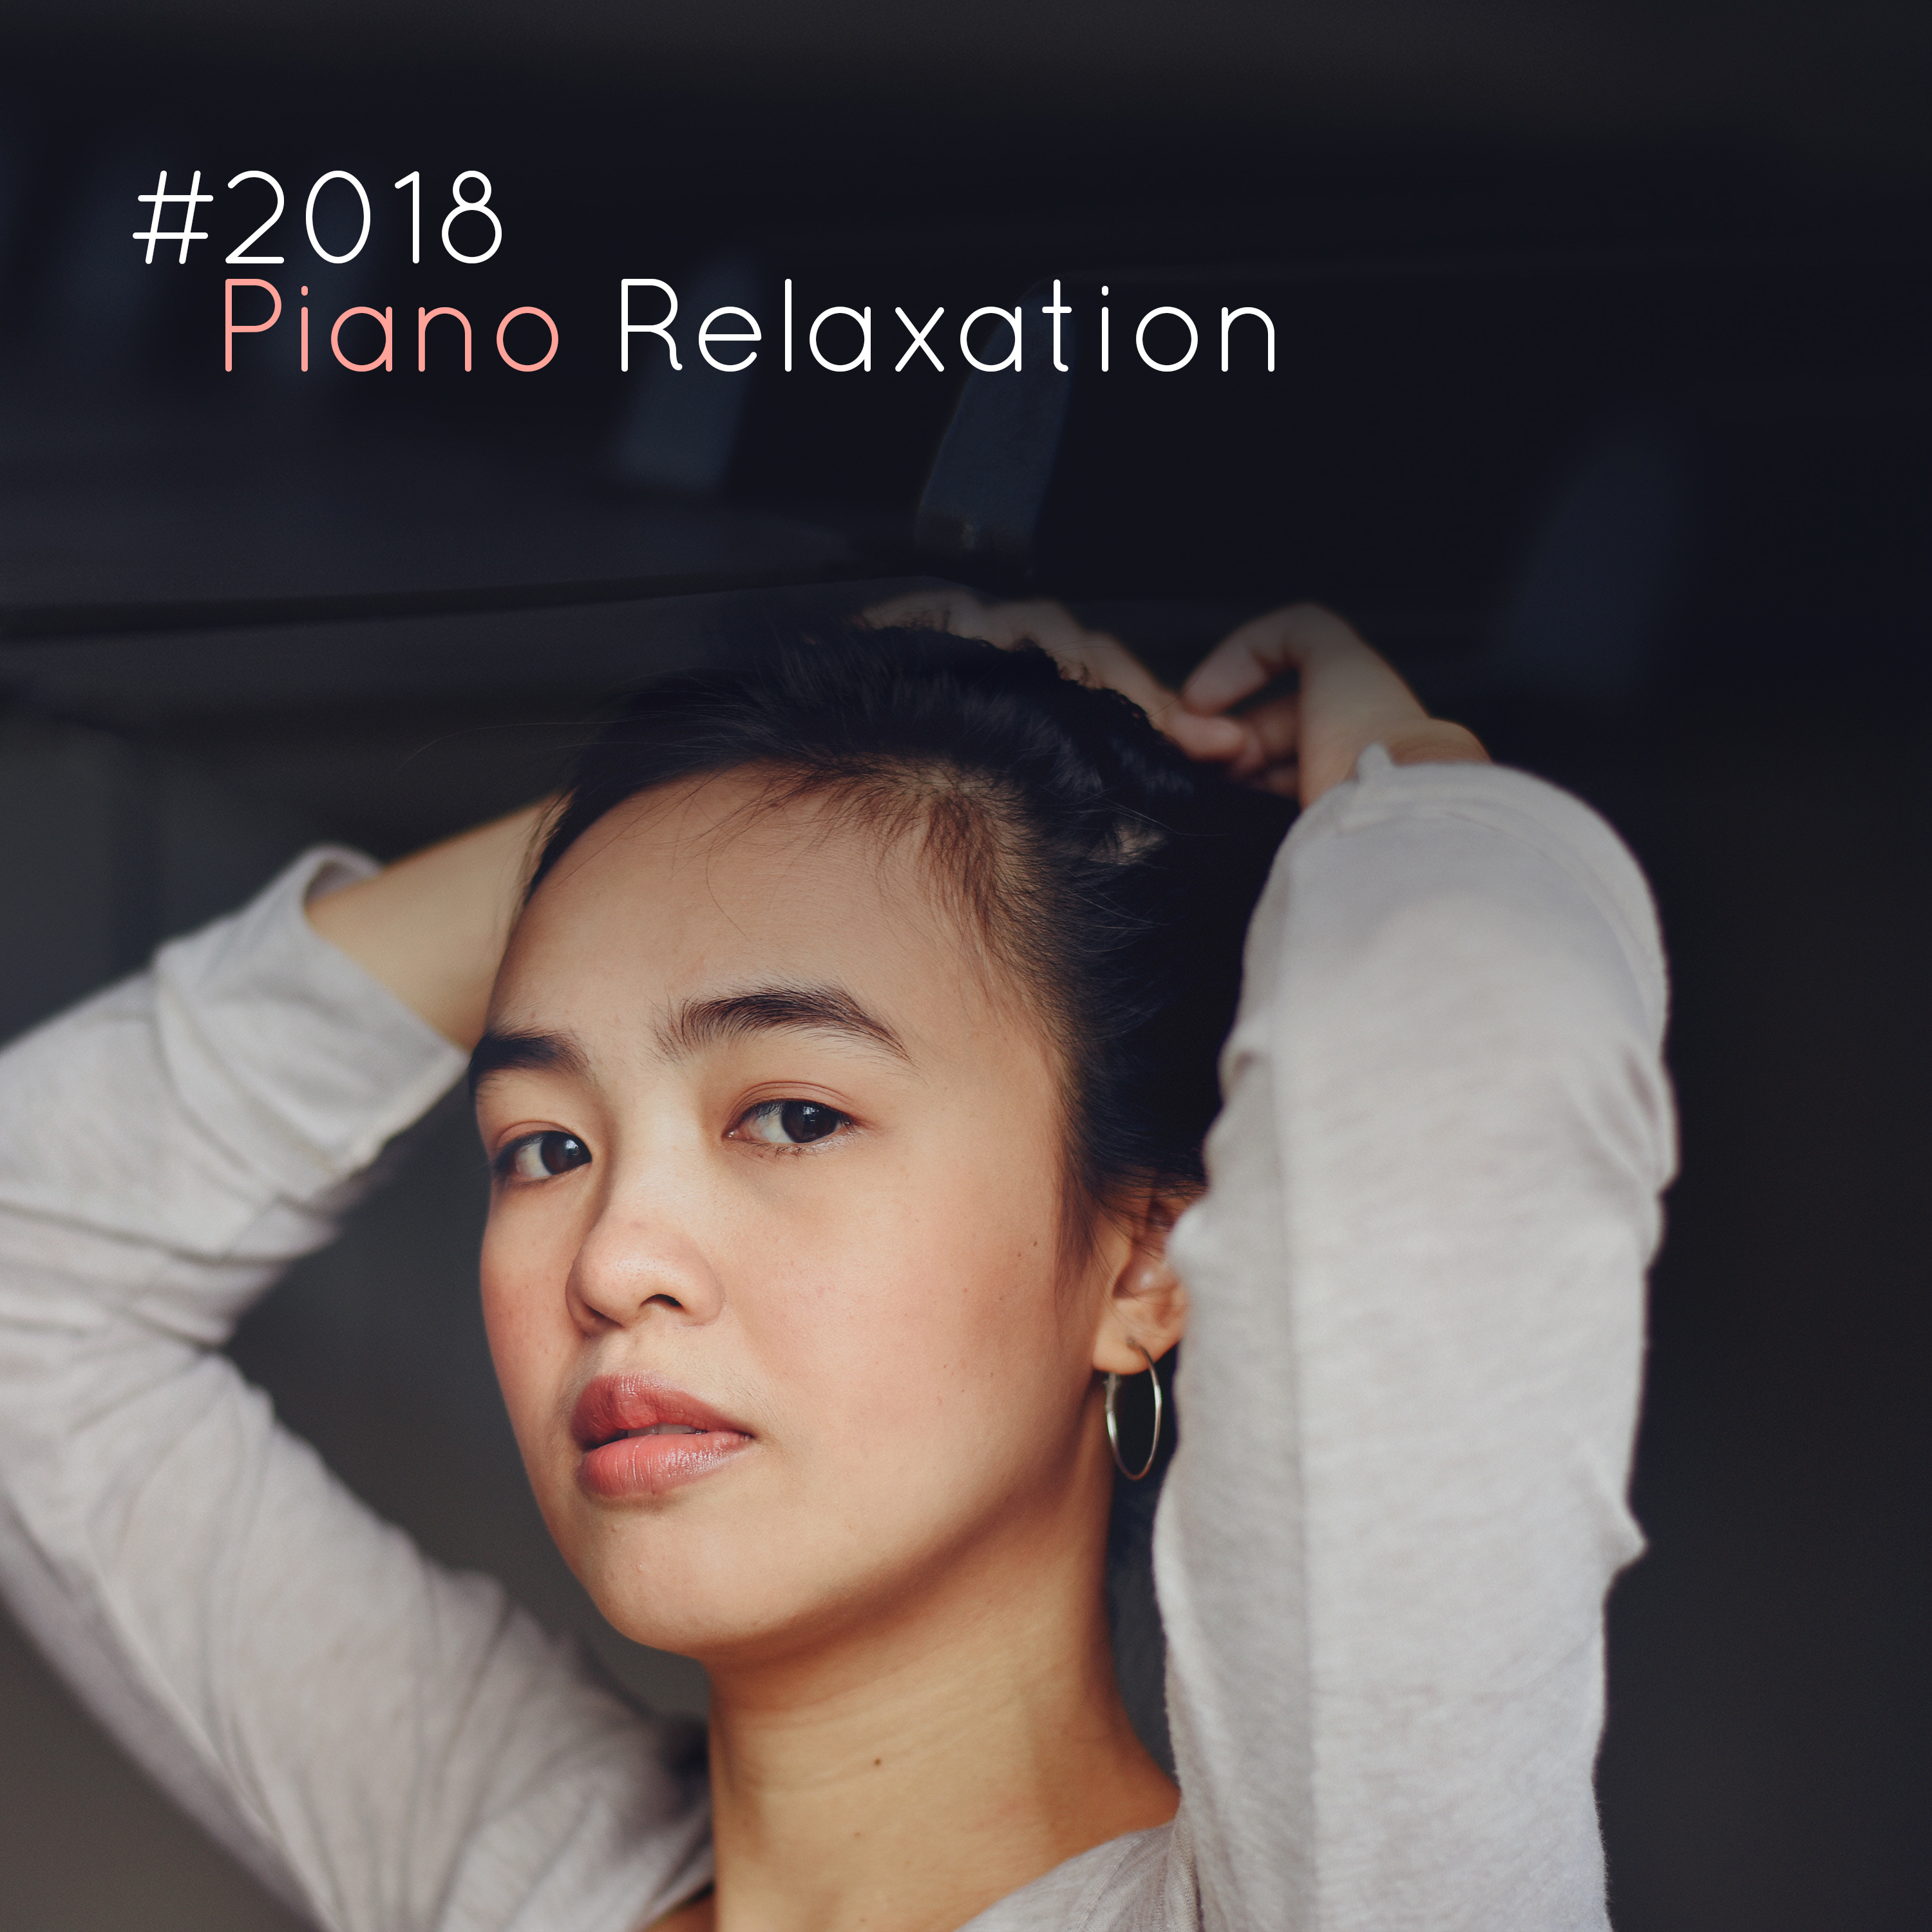 #2018 Piano Relaxation